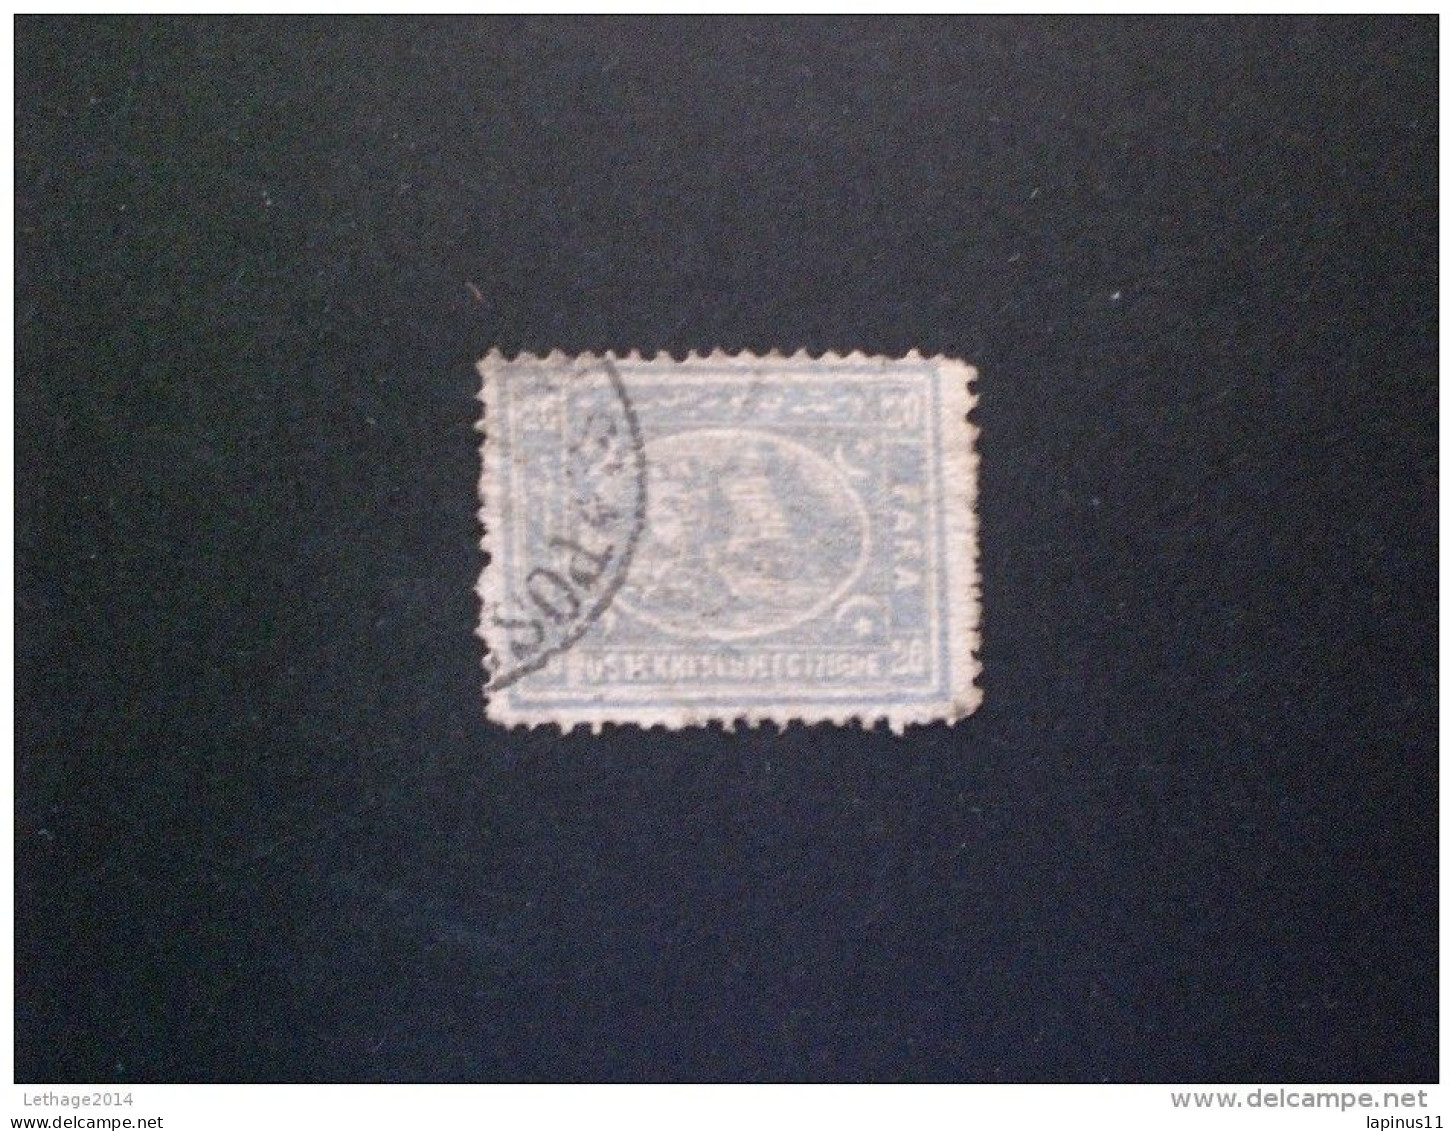 STAMPS EGITTO 1875 Sphinx And Pyramid - Blurred Impressions, Thin Paper PERF : 13 1/2 X 13 1/2 !!!! - 1866-1914 Khedivaat Egypte